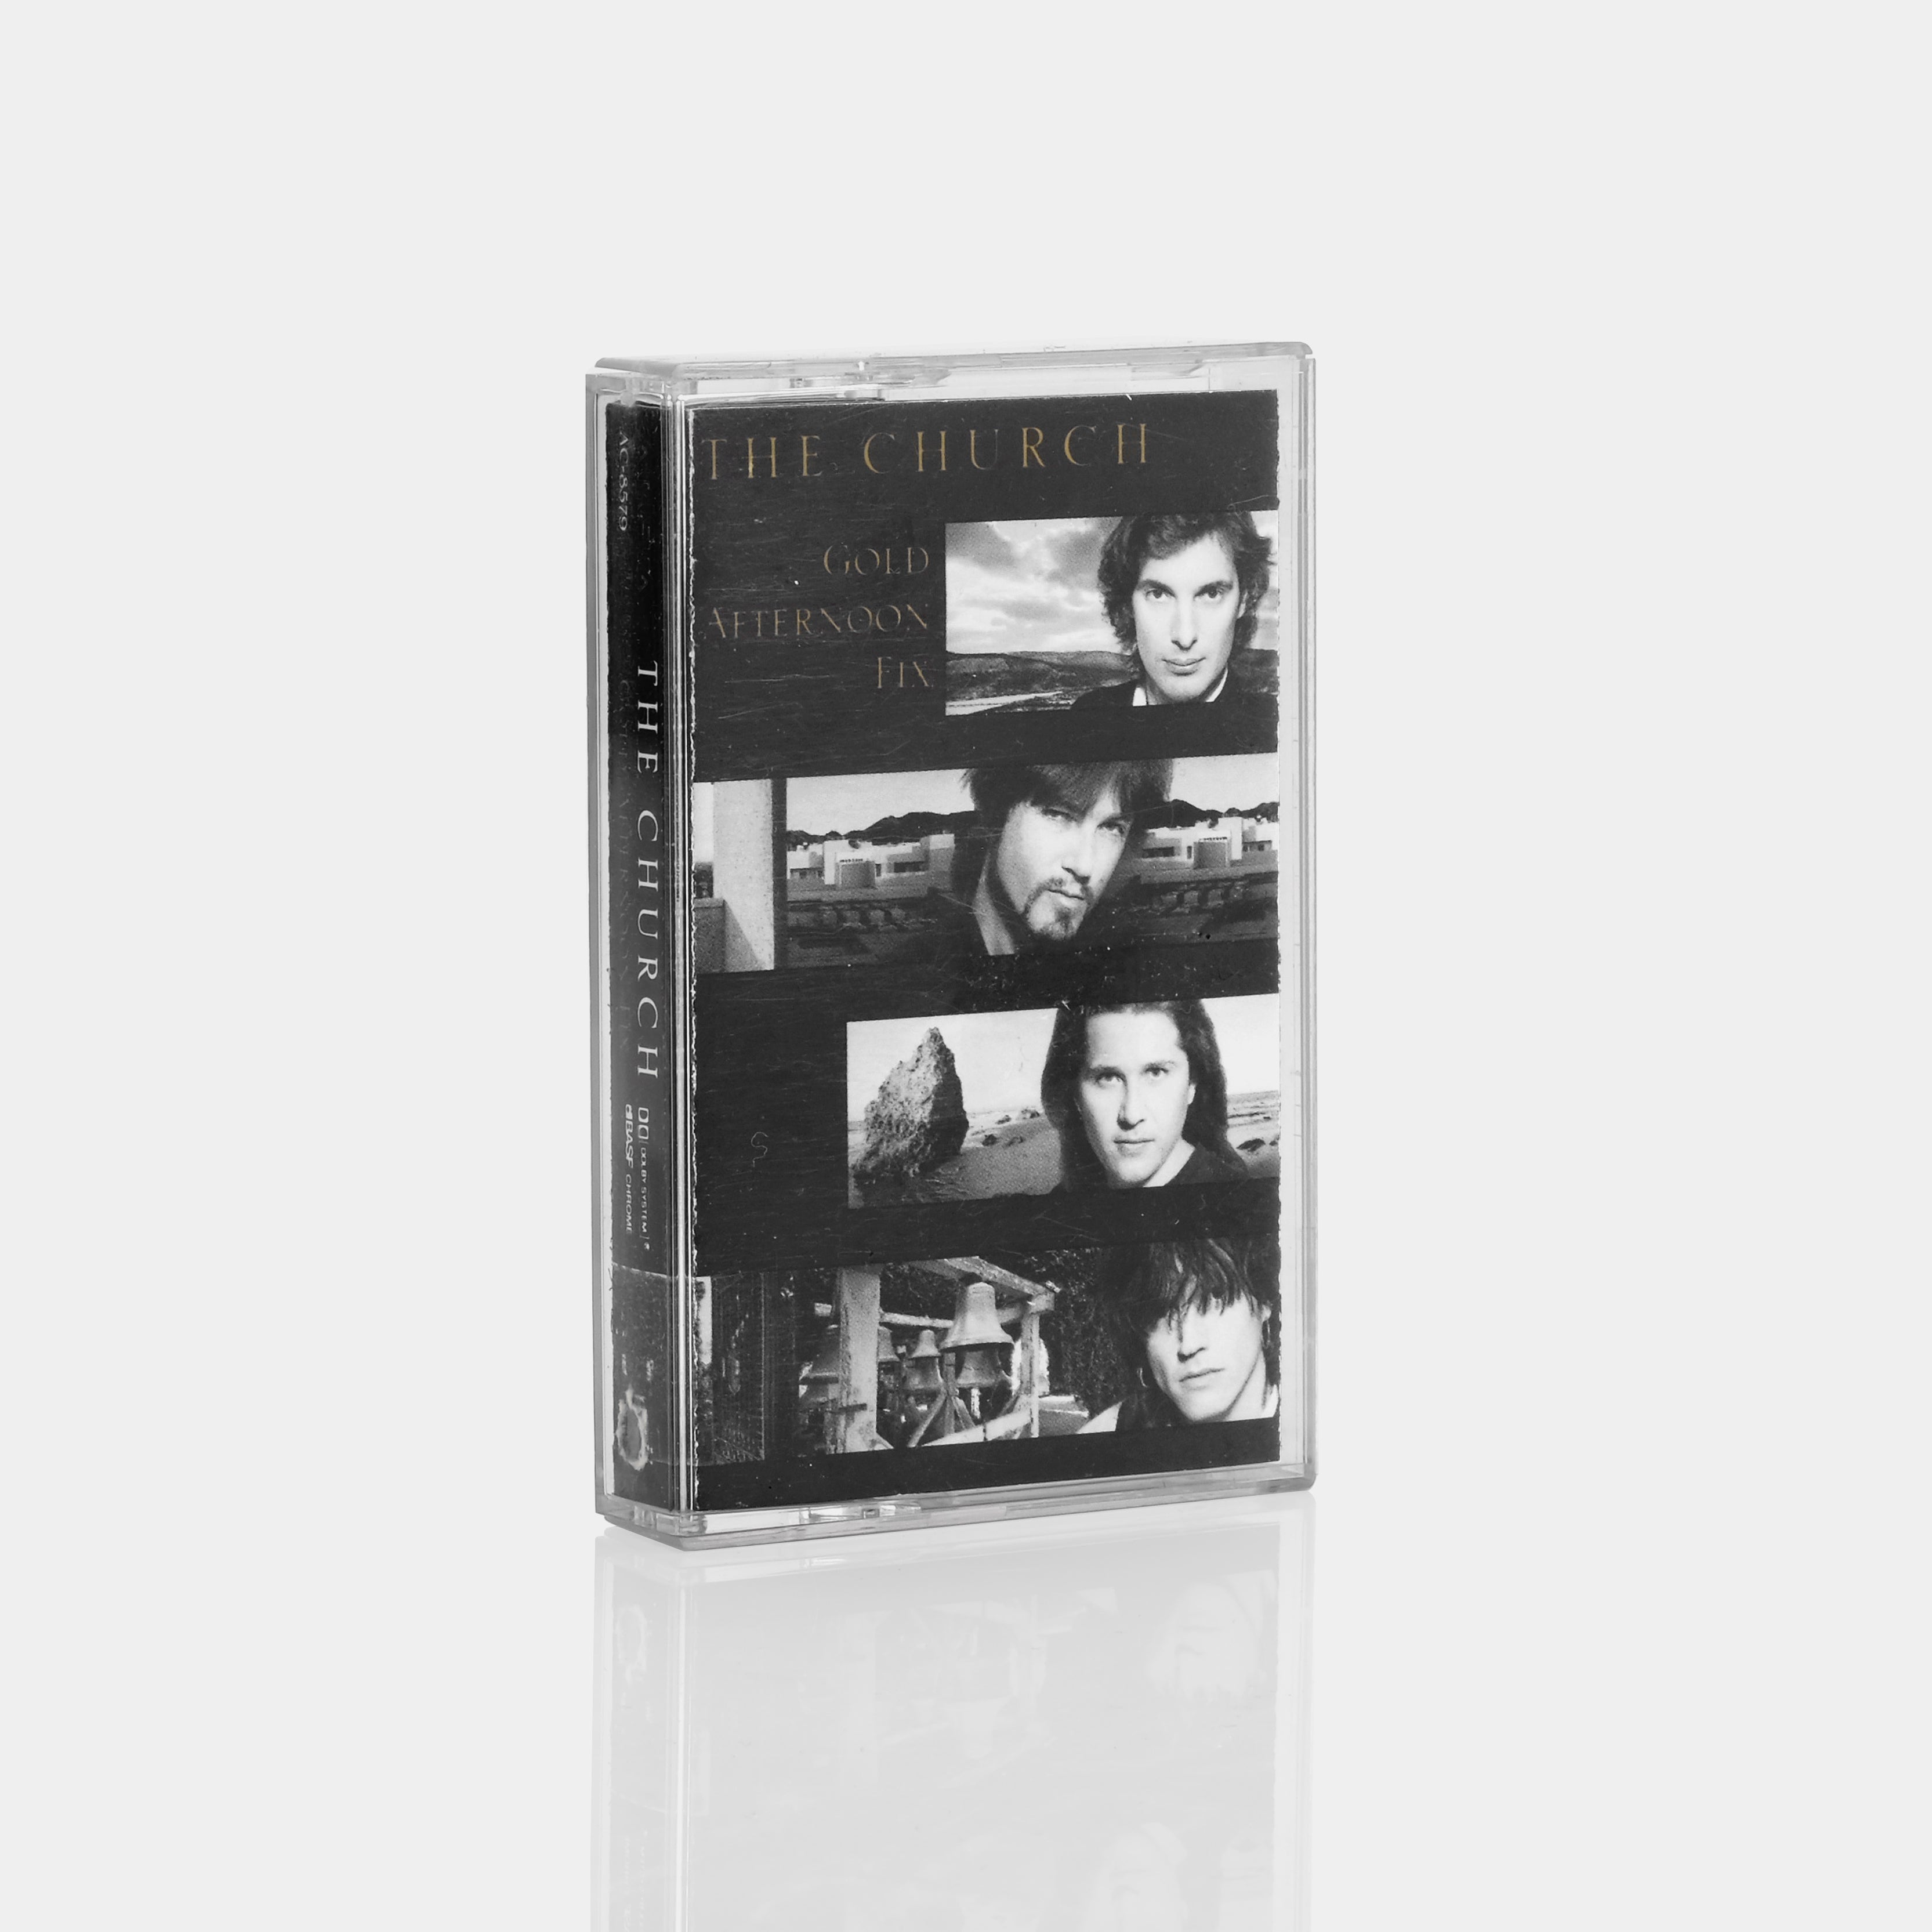 The Church - Gold Afternoon Fix Cassette Tape